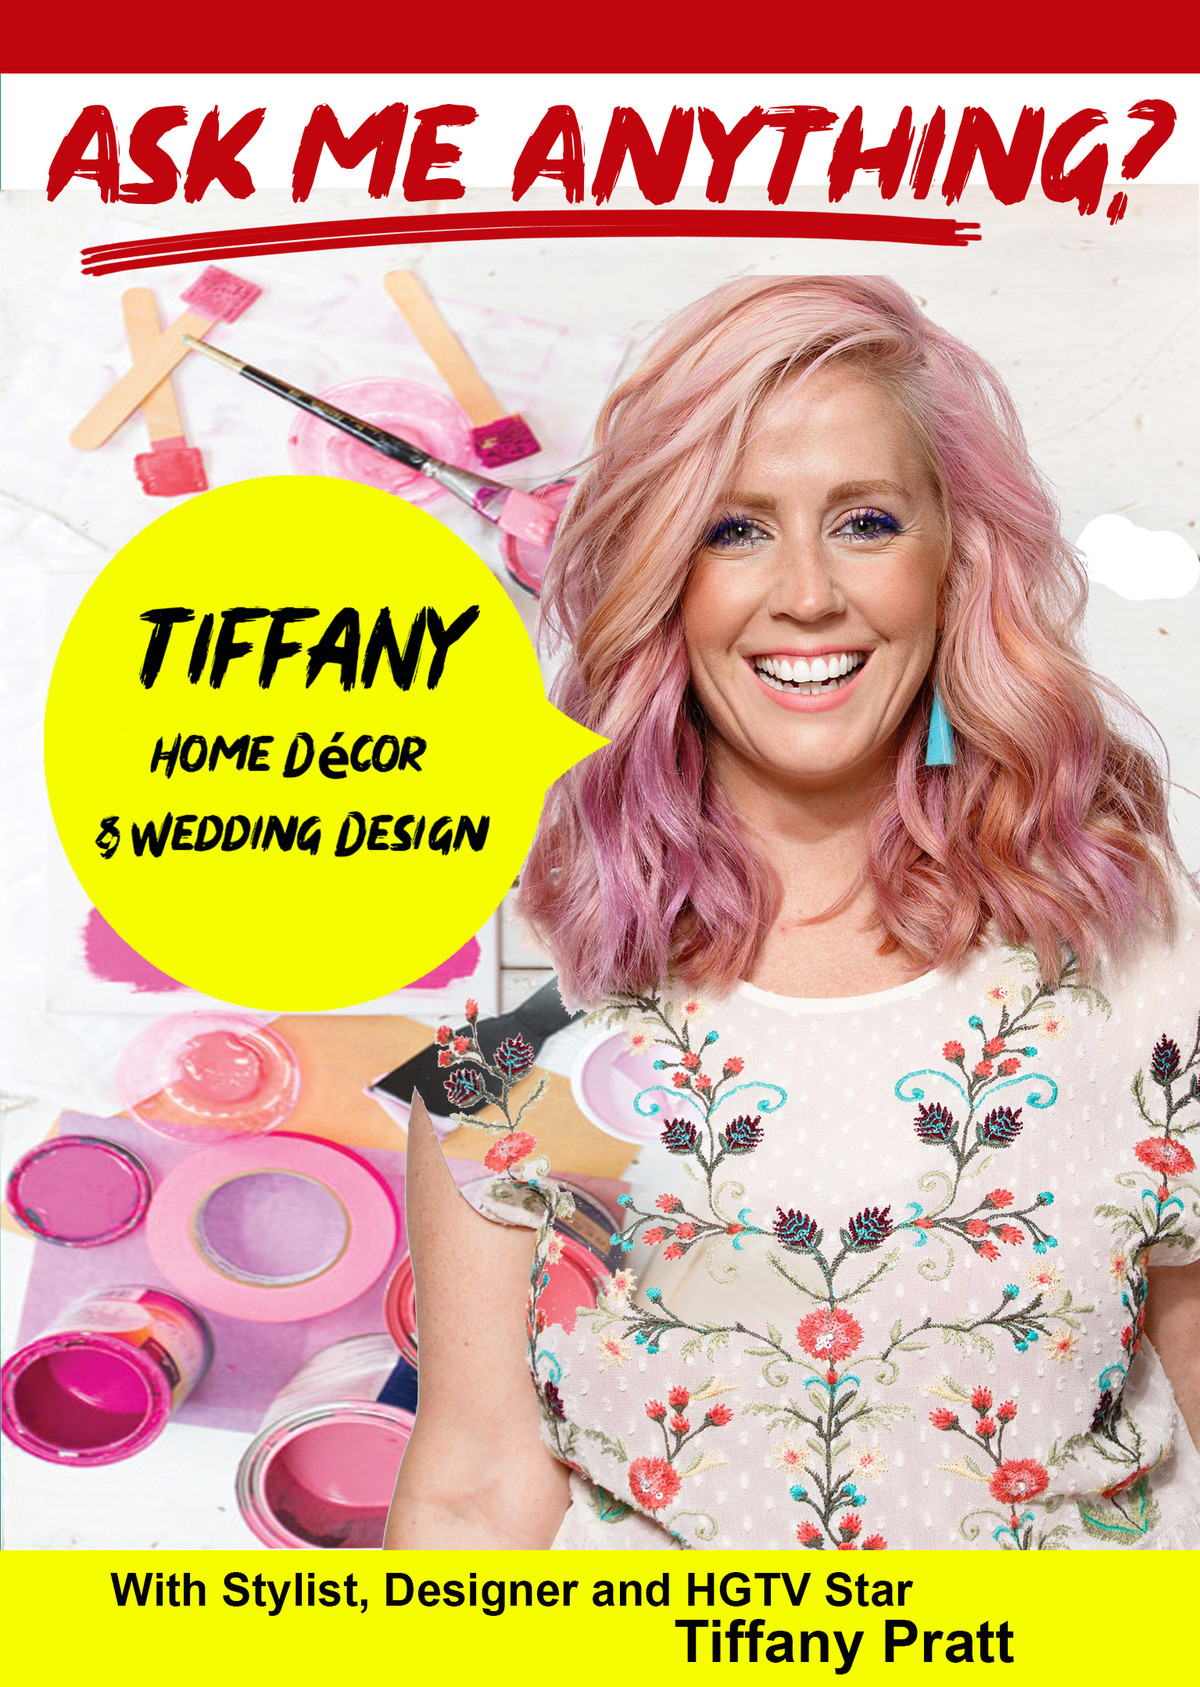 K4831 - Ask Me Anything about Home Dcor & Wedding Design with Tiffany Pratt